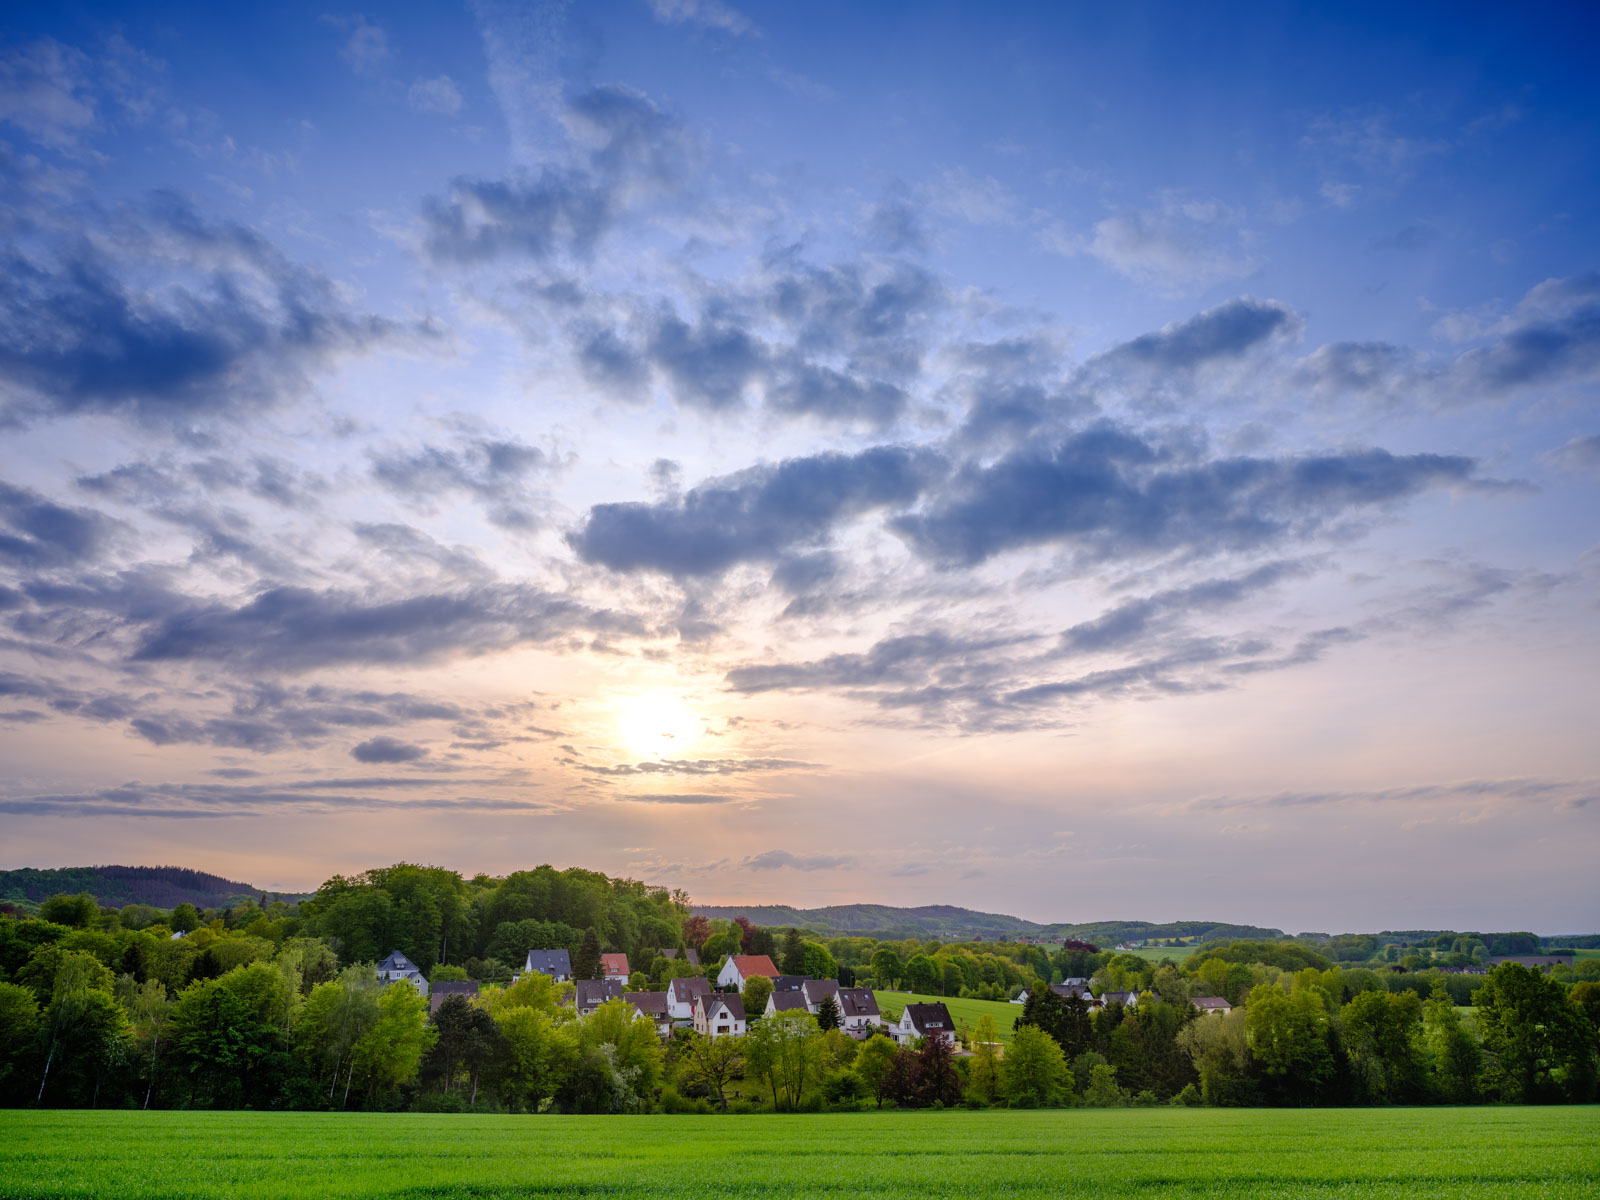 A sunset in May over the fields in Hoberge-Uerentrup (Bielefeld, Germany).